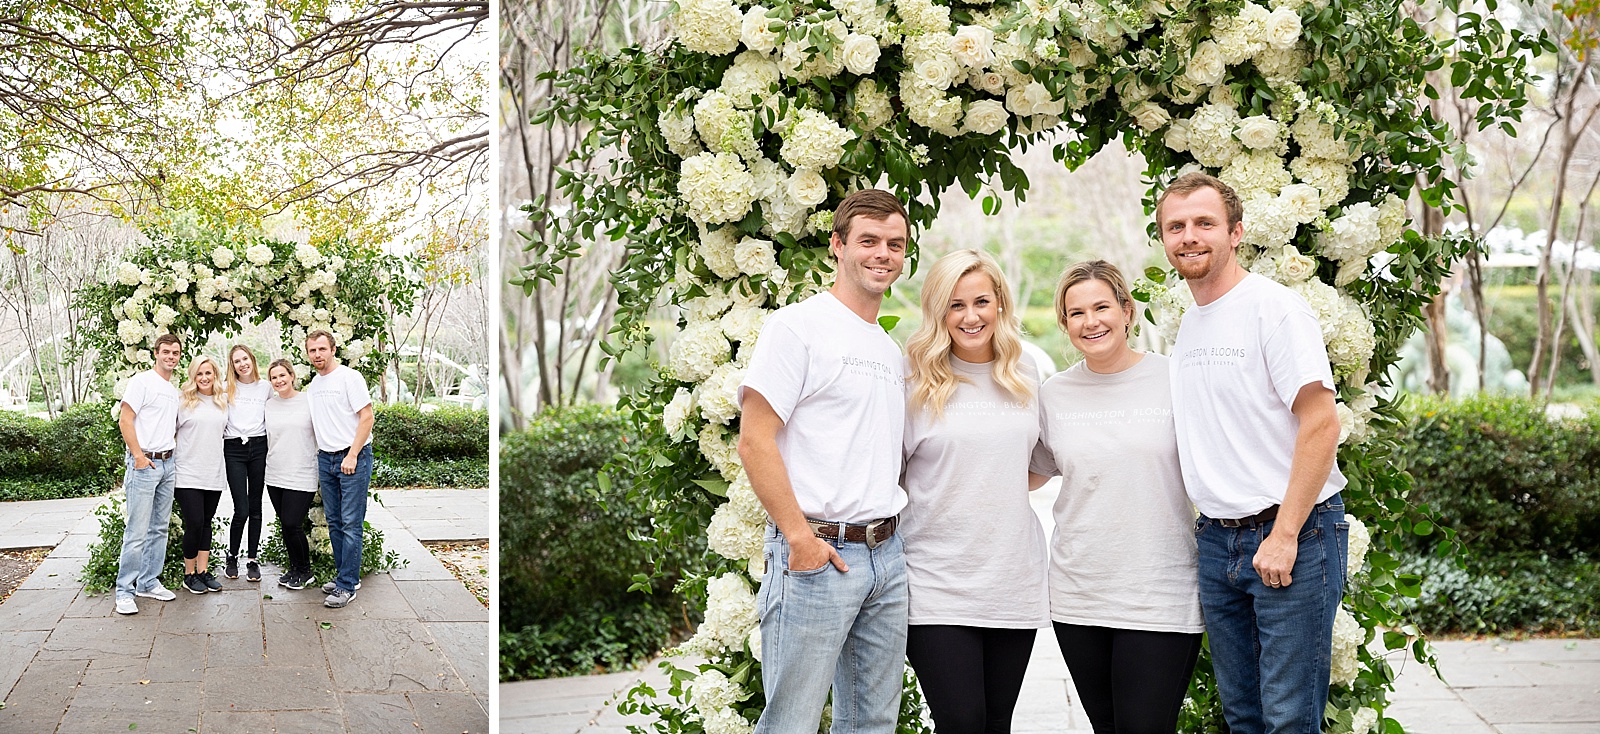 Vendor team at W Dallas Downtown Hotel floral shoot photographed by Randi Michelle Photography